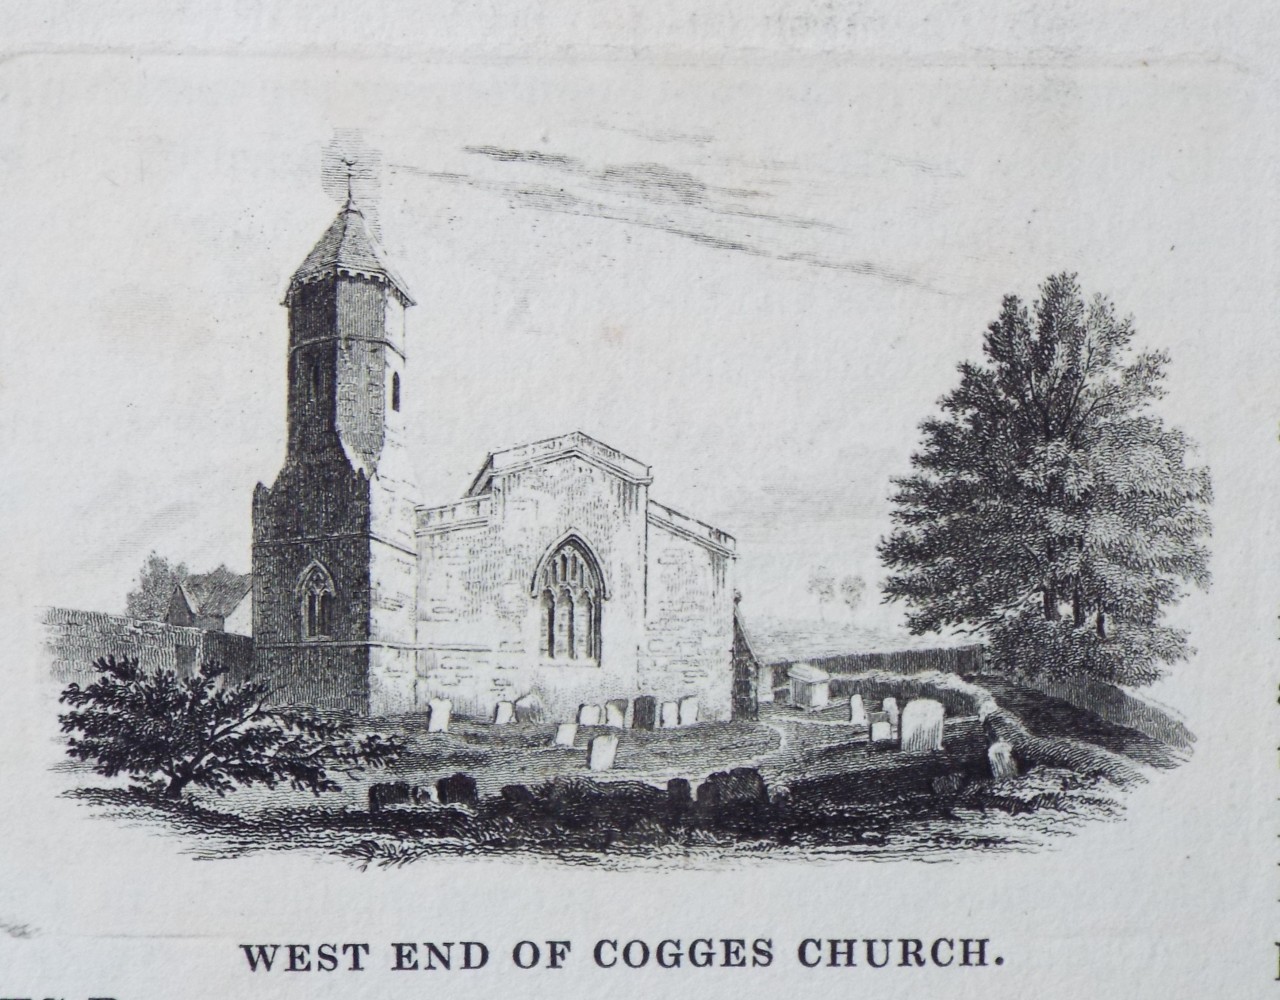 Print - West End of Cogges Church.